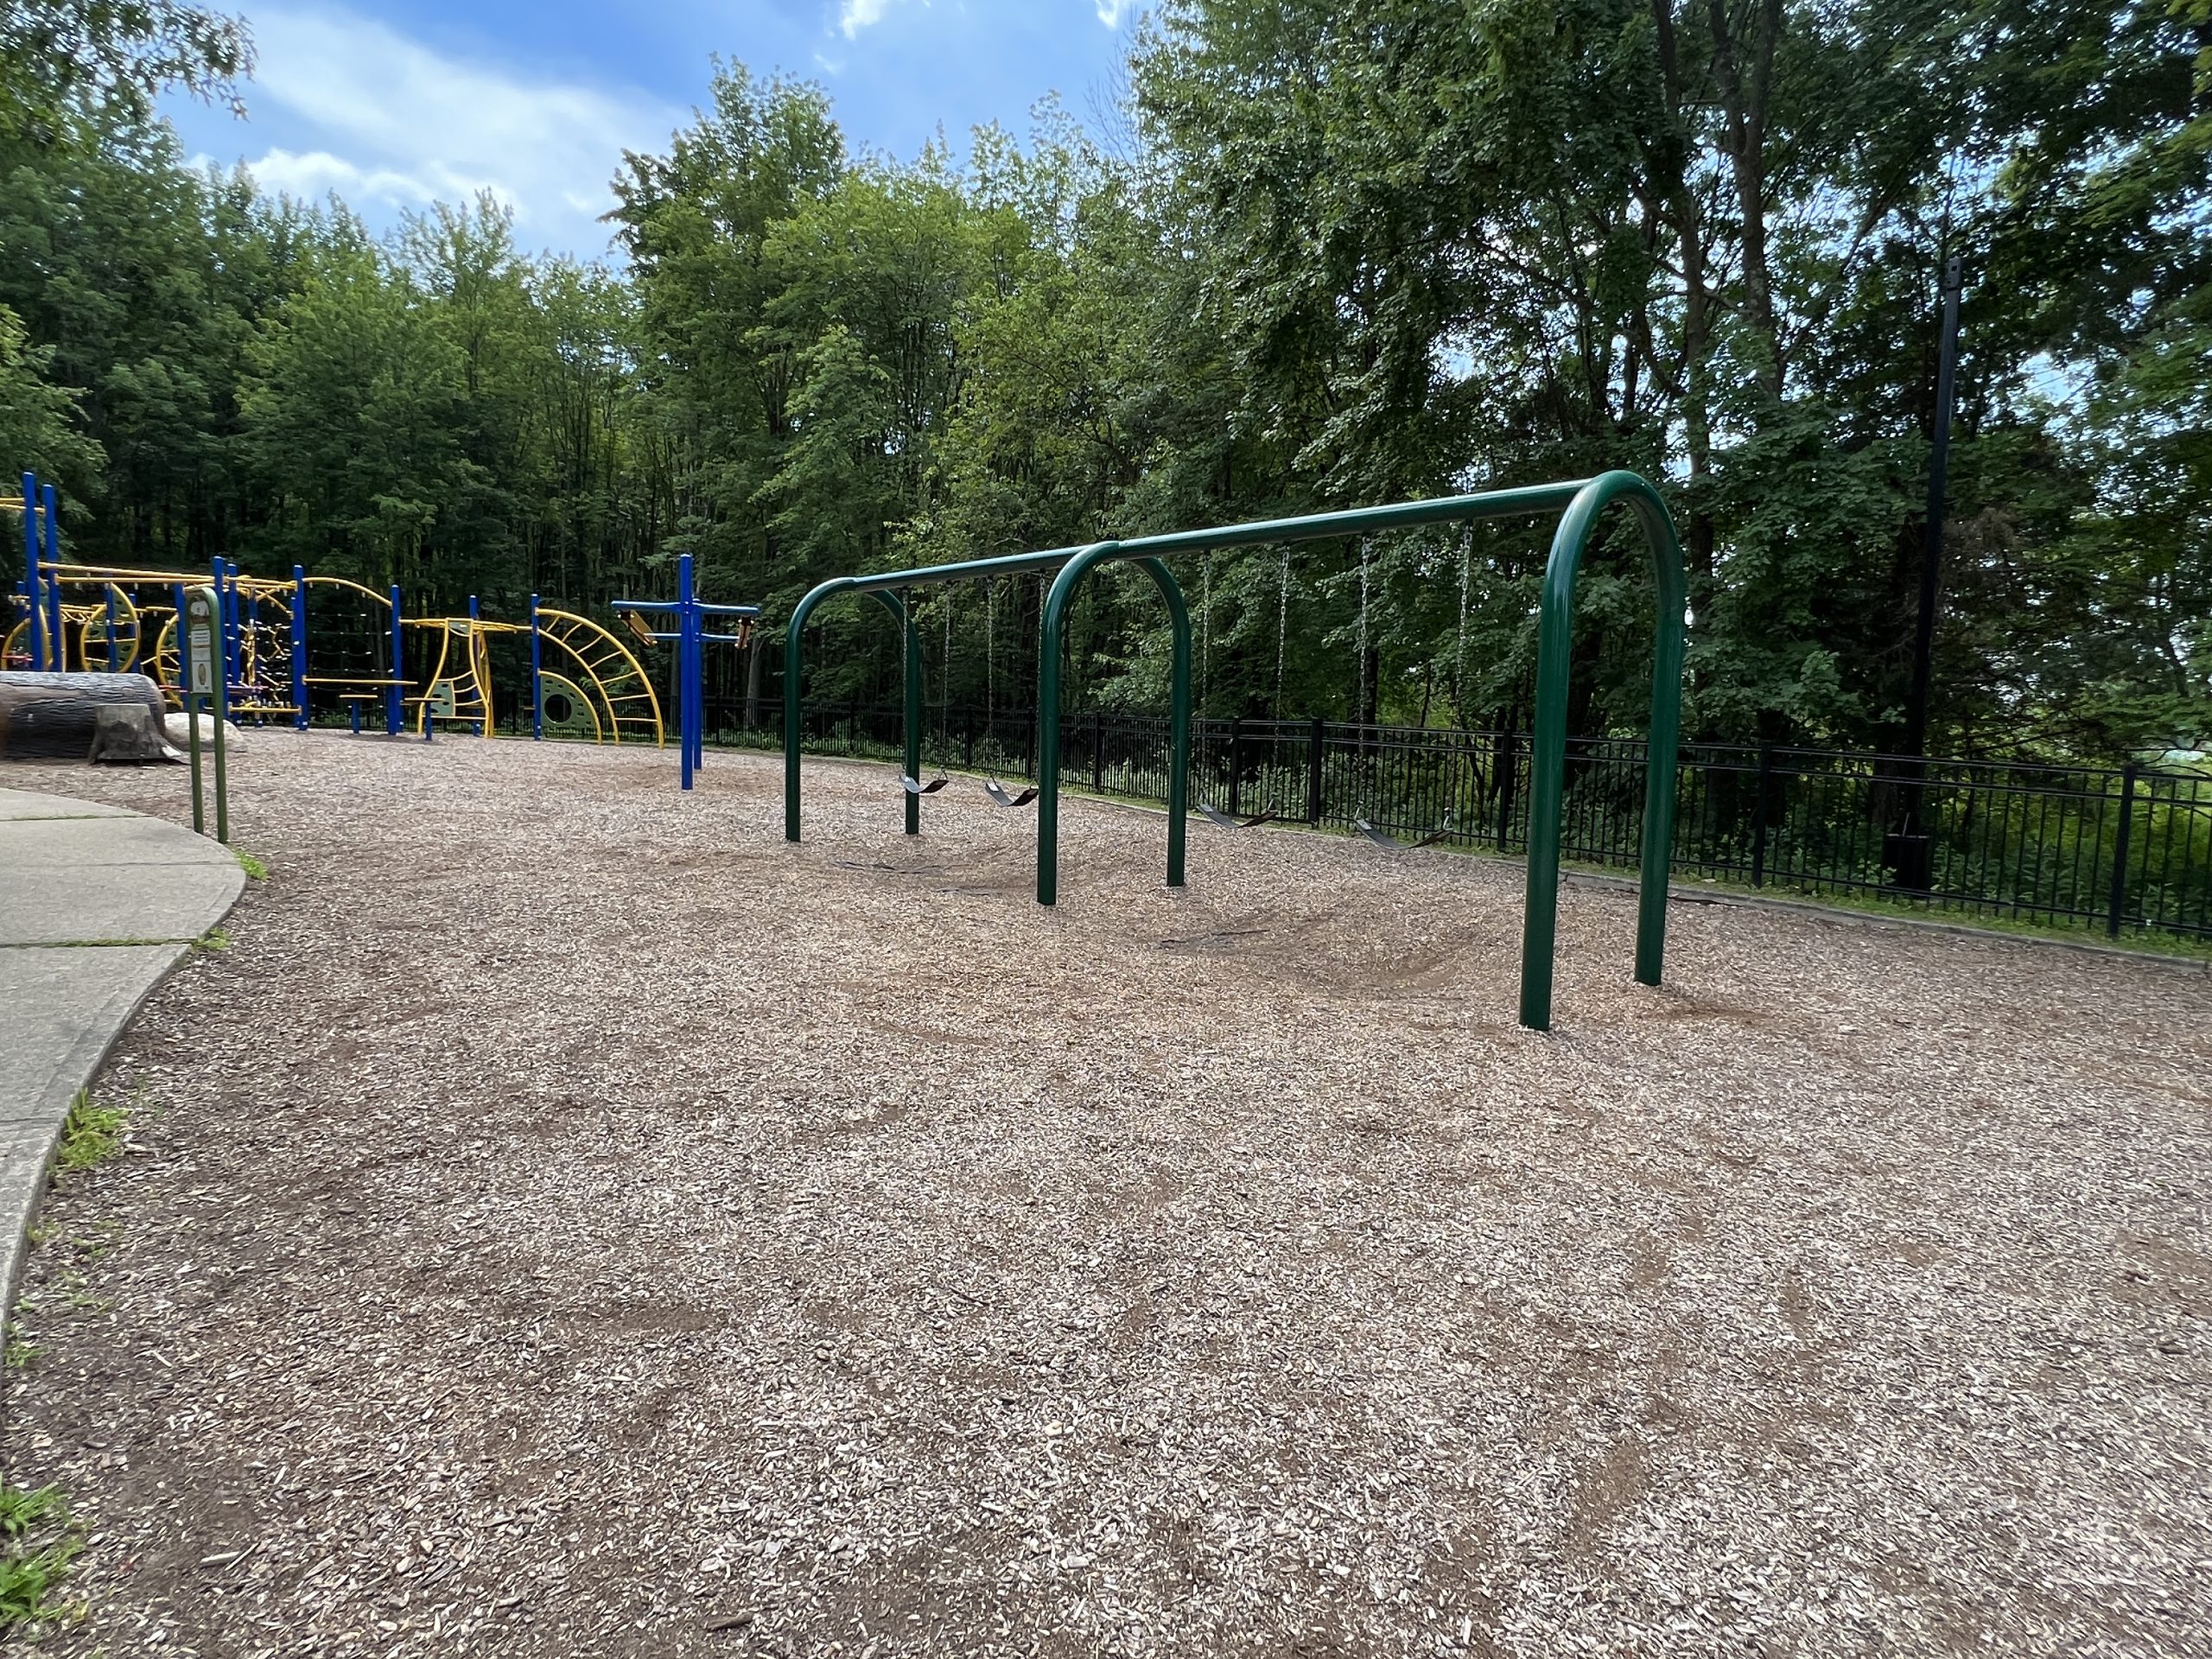 Montville Community Playground in Montville NJ SWINGS traditional USE